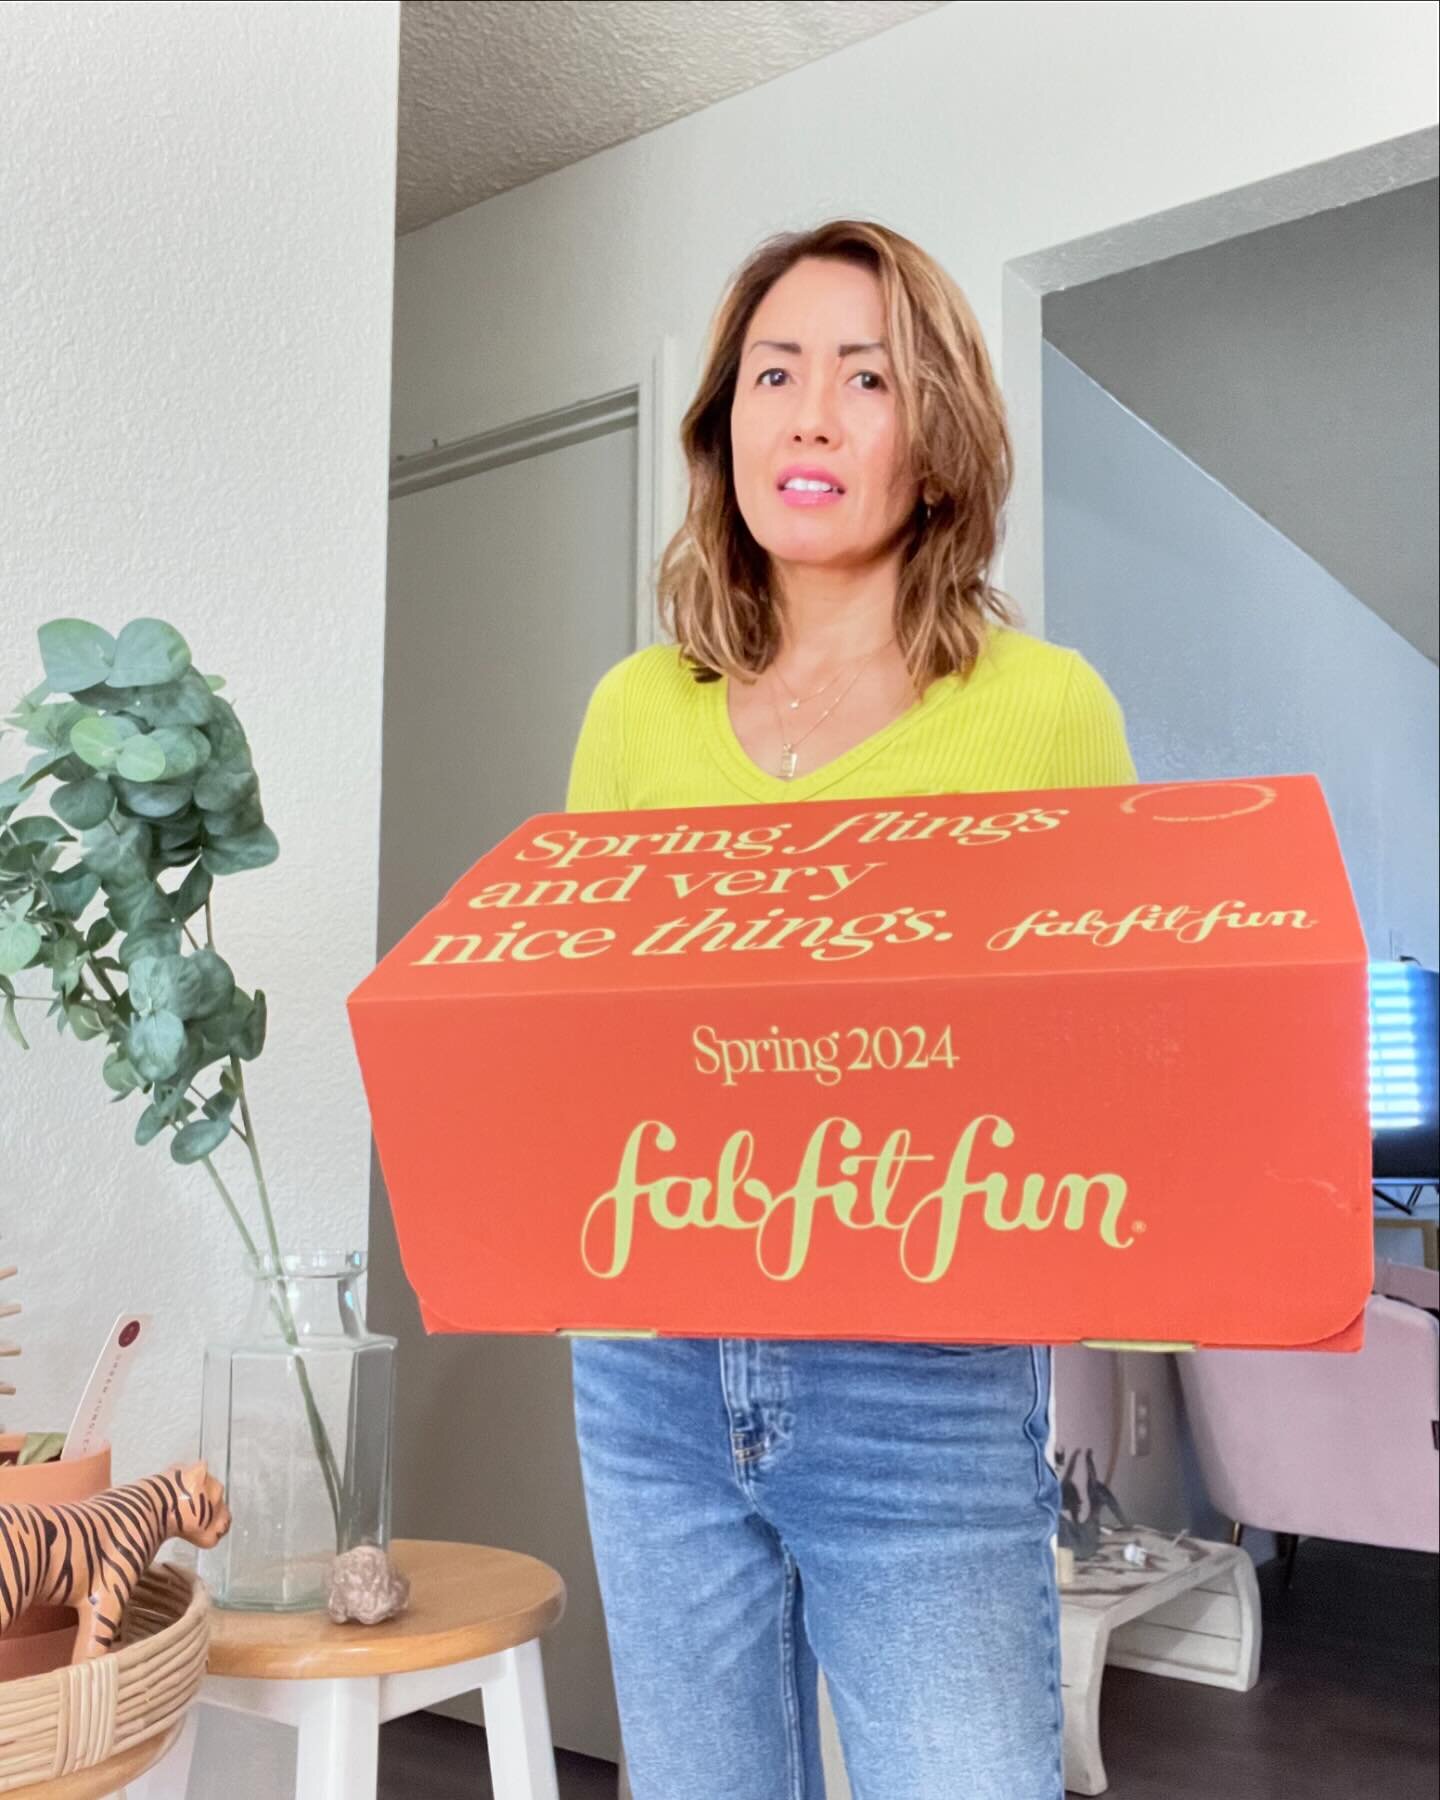 What&rsquo;s in my @fabfitfun Spring Box? Goodies from brands like Beyond Yoga, AG CARE, First Aid Beauty&hellip;
Customize your box with my promo code ⬇️

Annual Subscription Promo (gift with purchase) 

Code: TAM20GIFT

Link: https://fff.me/TAM20GI